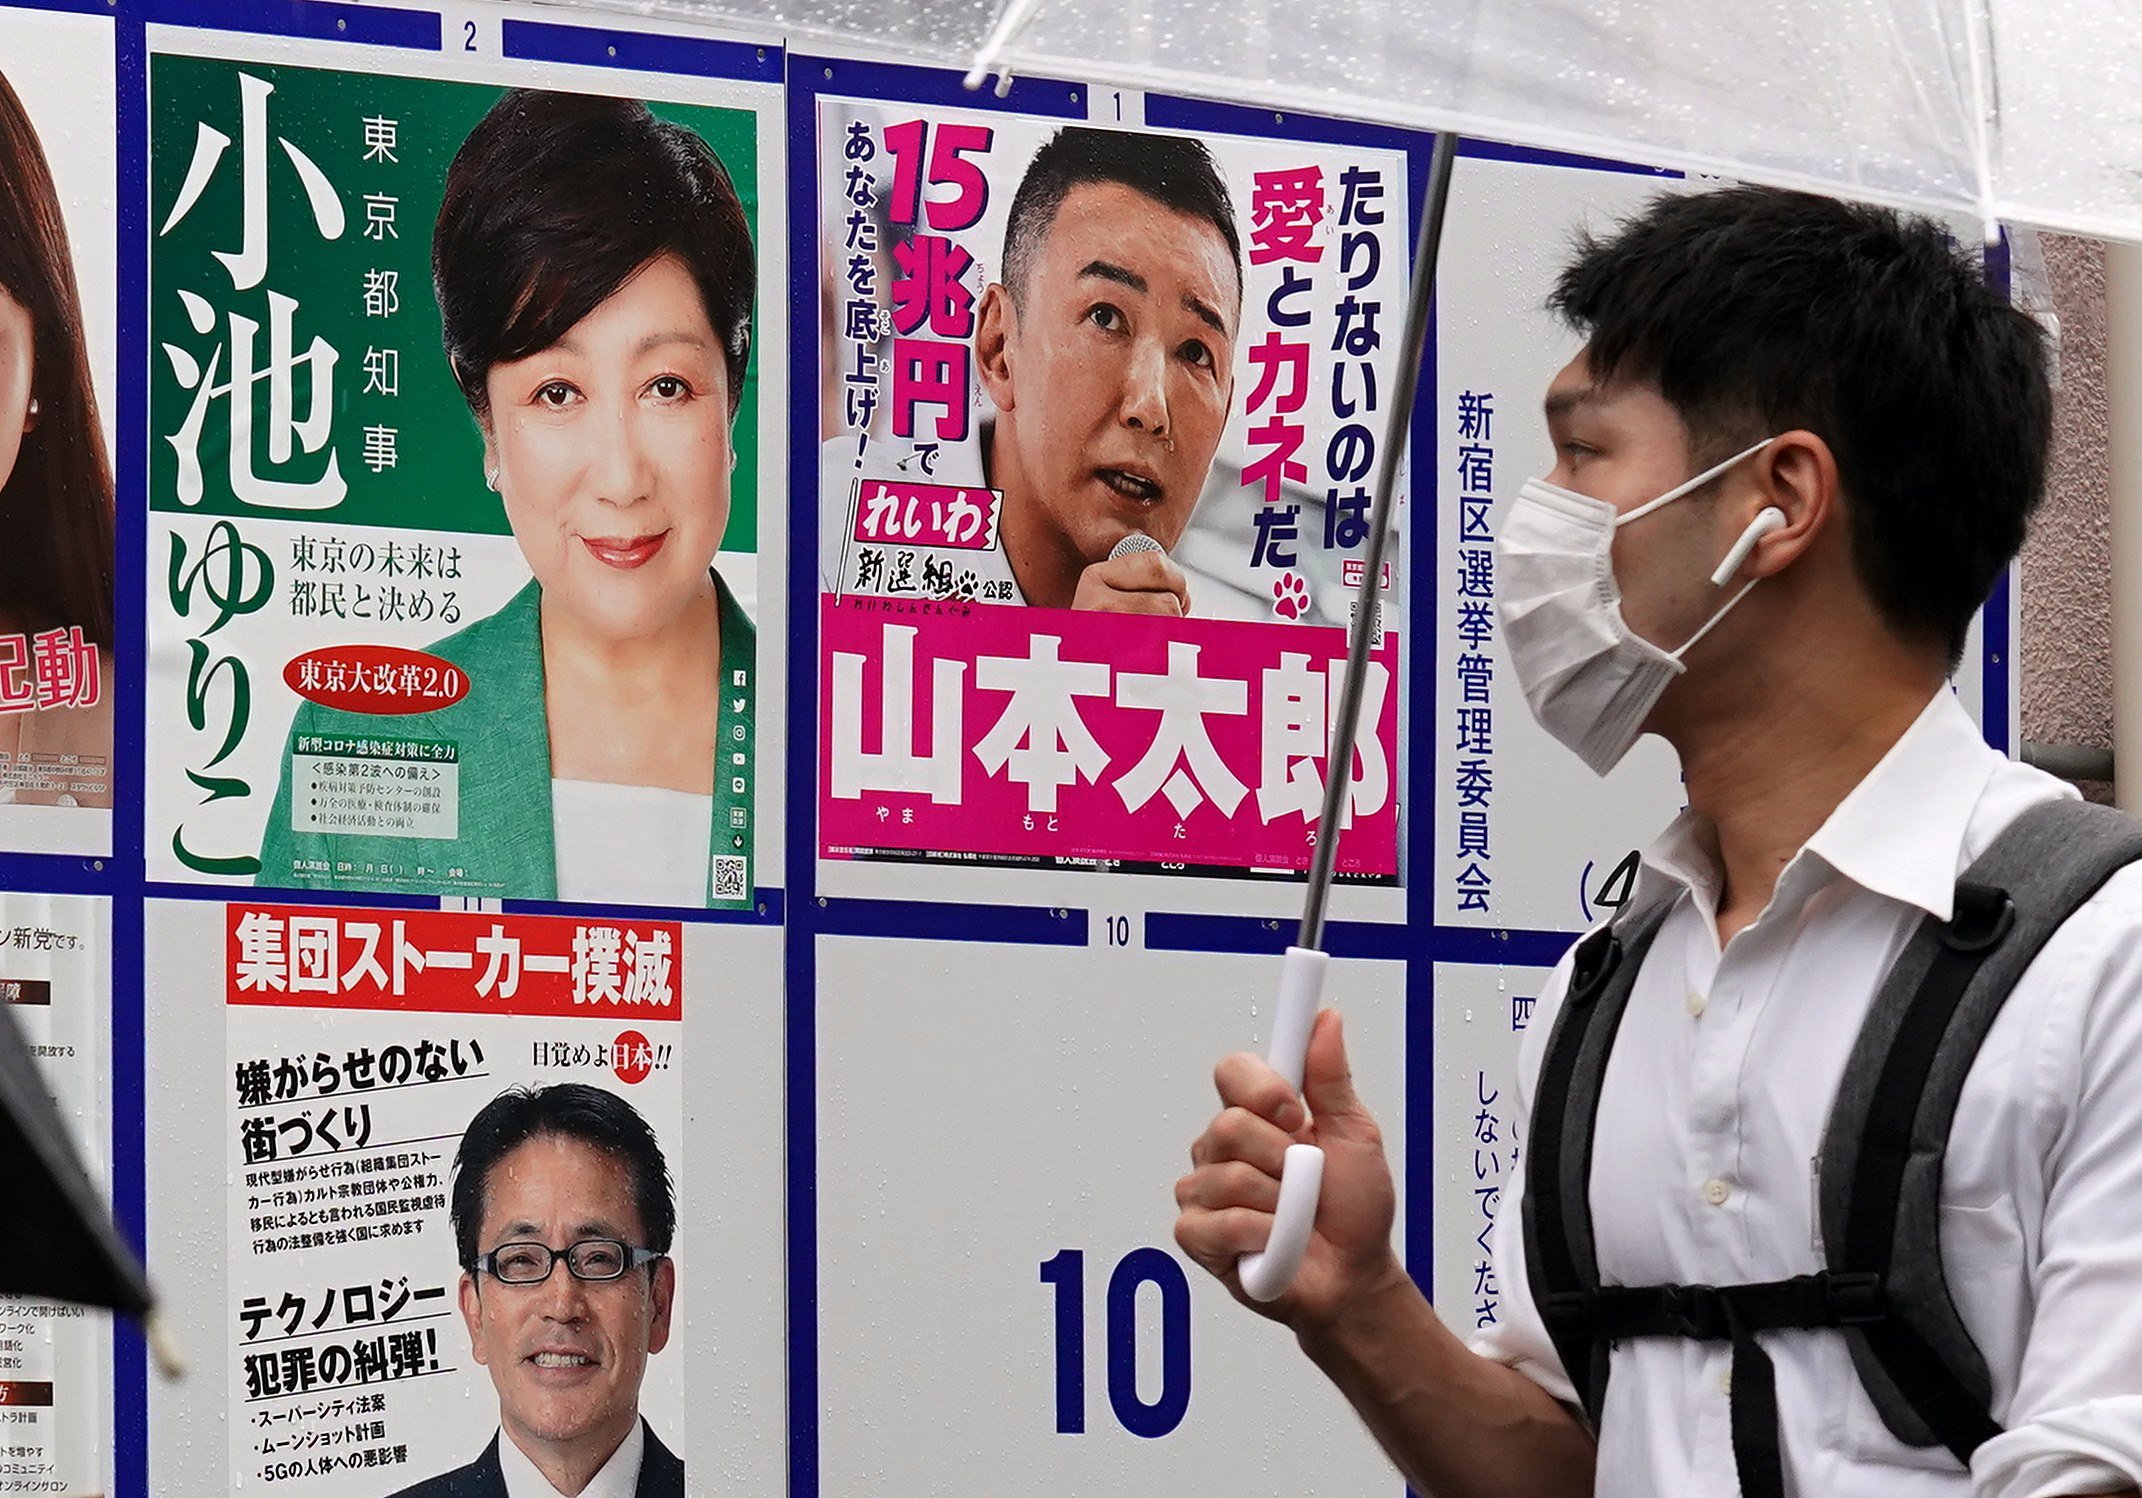 A man glances at campaign posters as voters flock to the polls in the Tokyo gubernatorial election in July 2020. Most Japanese citizens do not support any particular political party, according to a new opinion poll. Photo: EPA-EFE